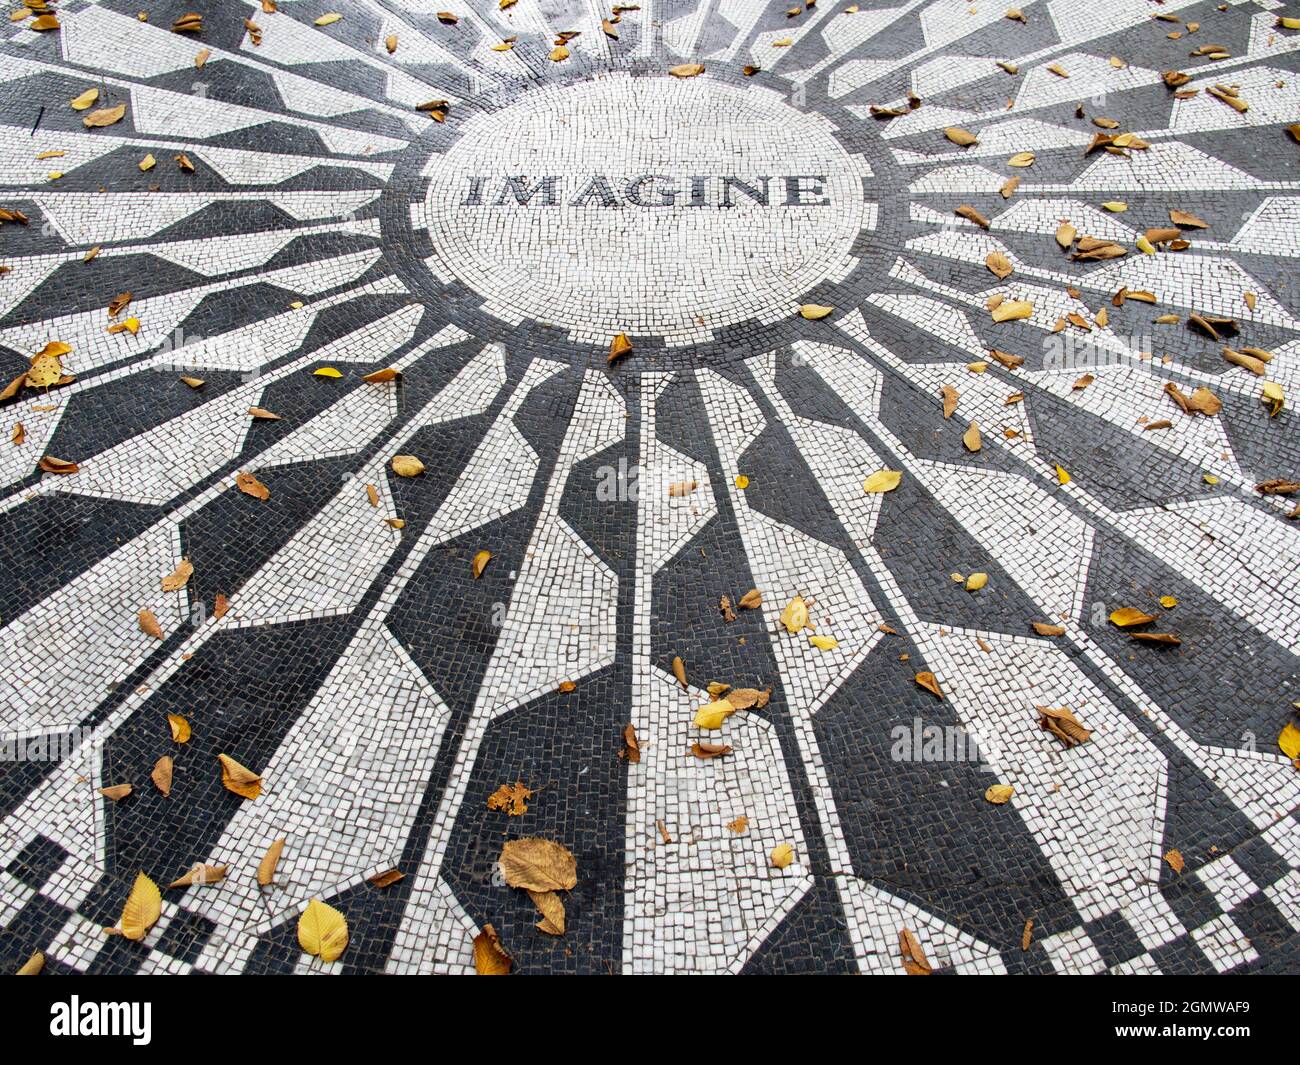 New York, USA - 3 November 2013; no people in view. An iconic place in an iconic city - the simple but dignified memorial to John Lennon in Strawberry Stock Photo